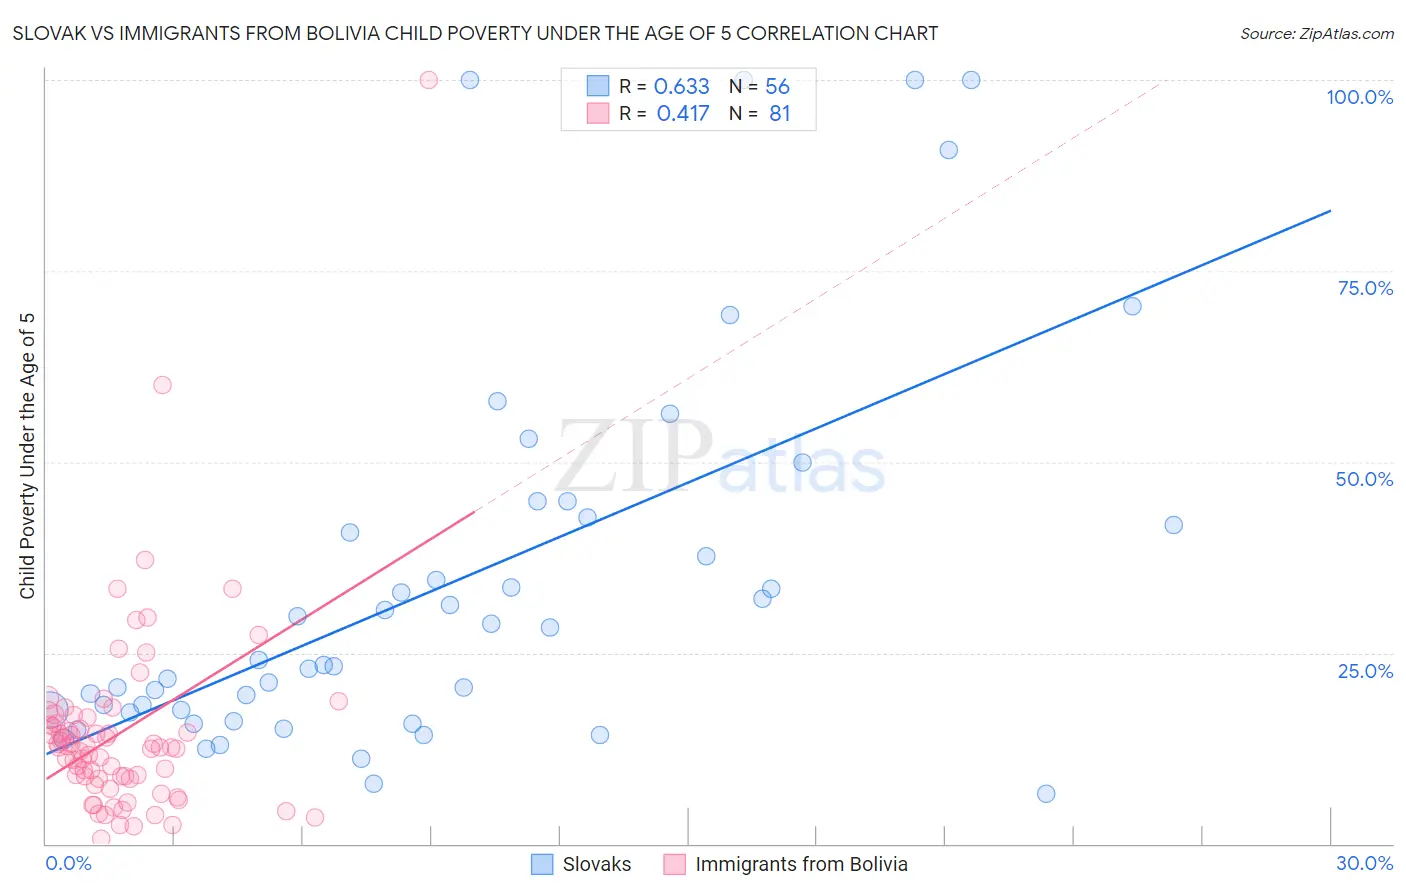 Slovak vs Immigrants from Bolivia Child Poverty Under the Age of 5